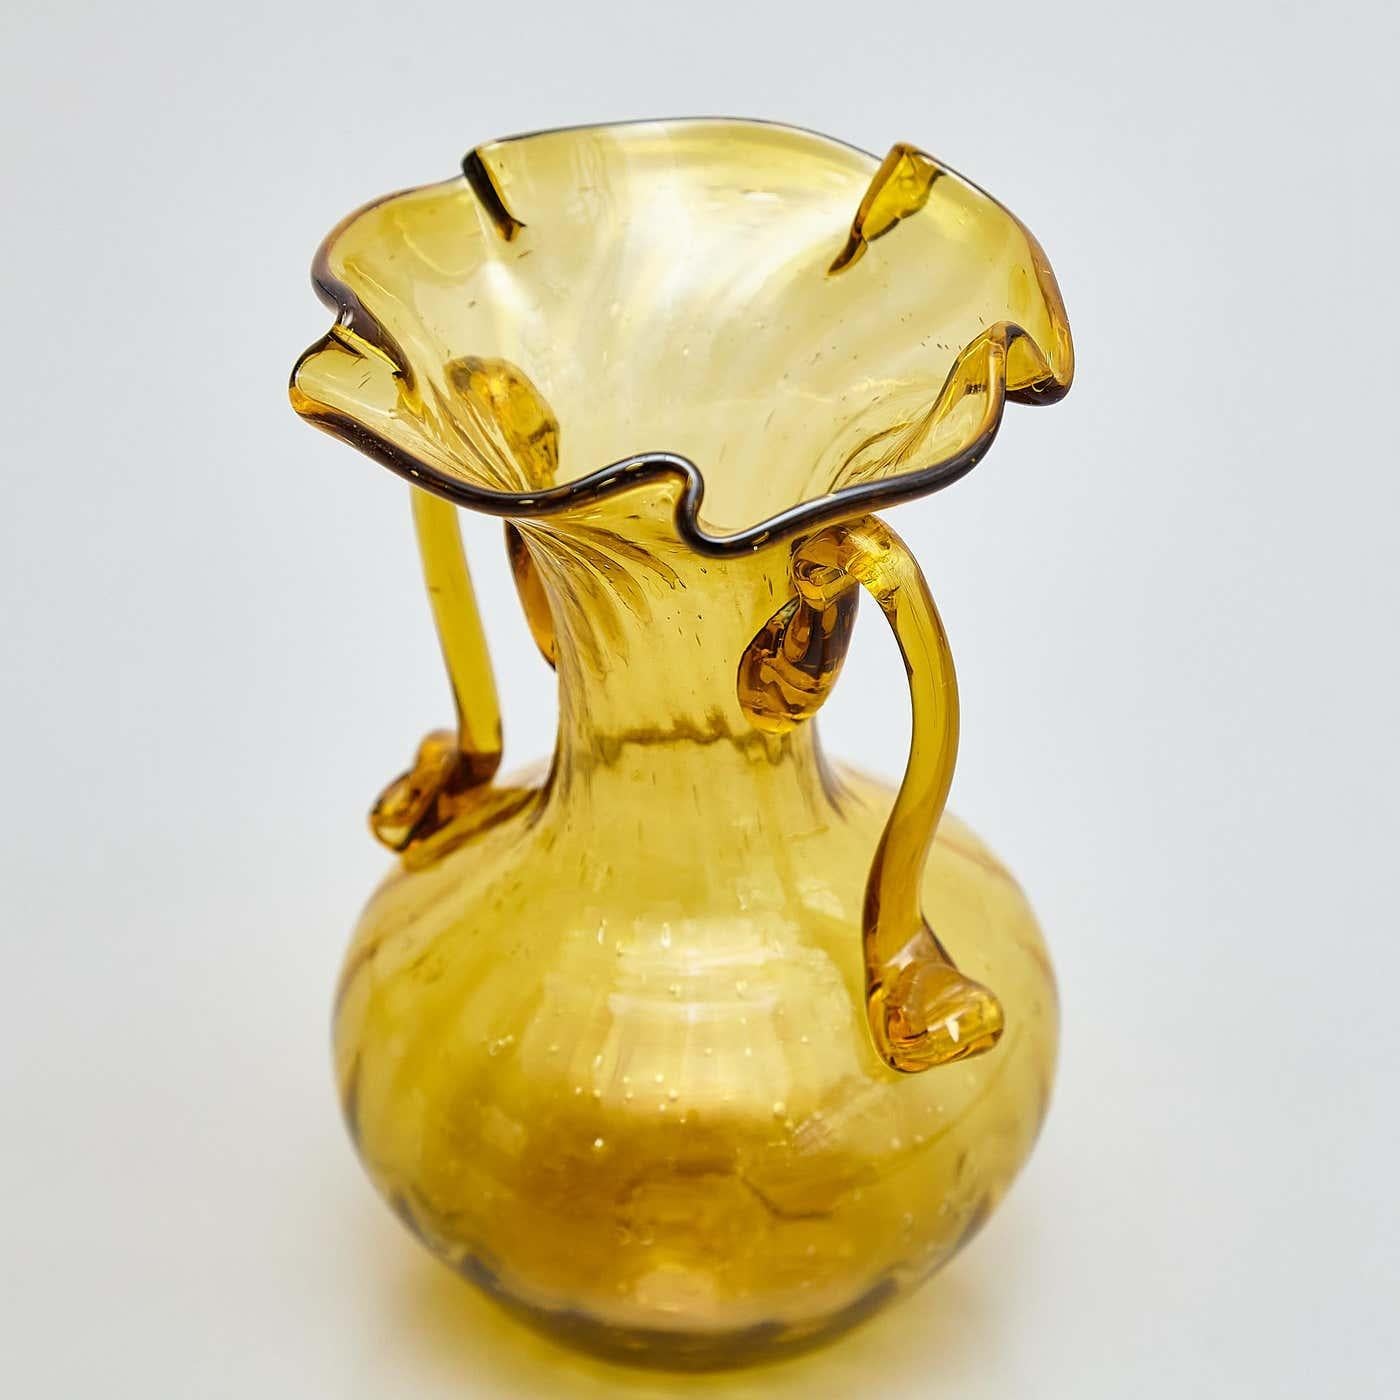 Rustic Extraordinary Yellow Blown Glass Vase - Early 20th Century